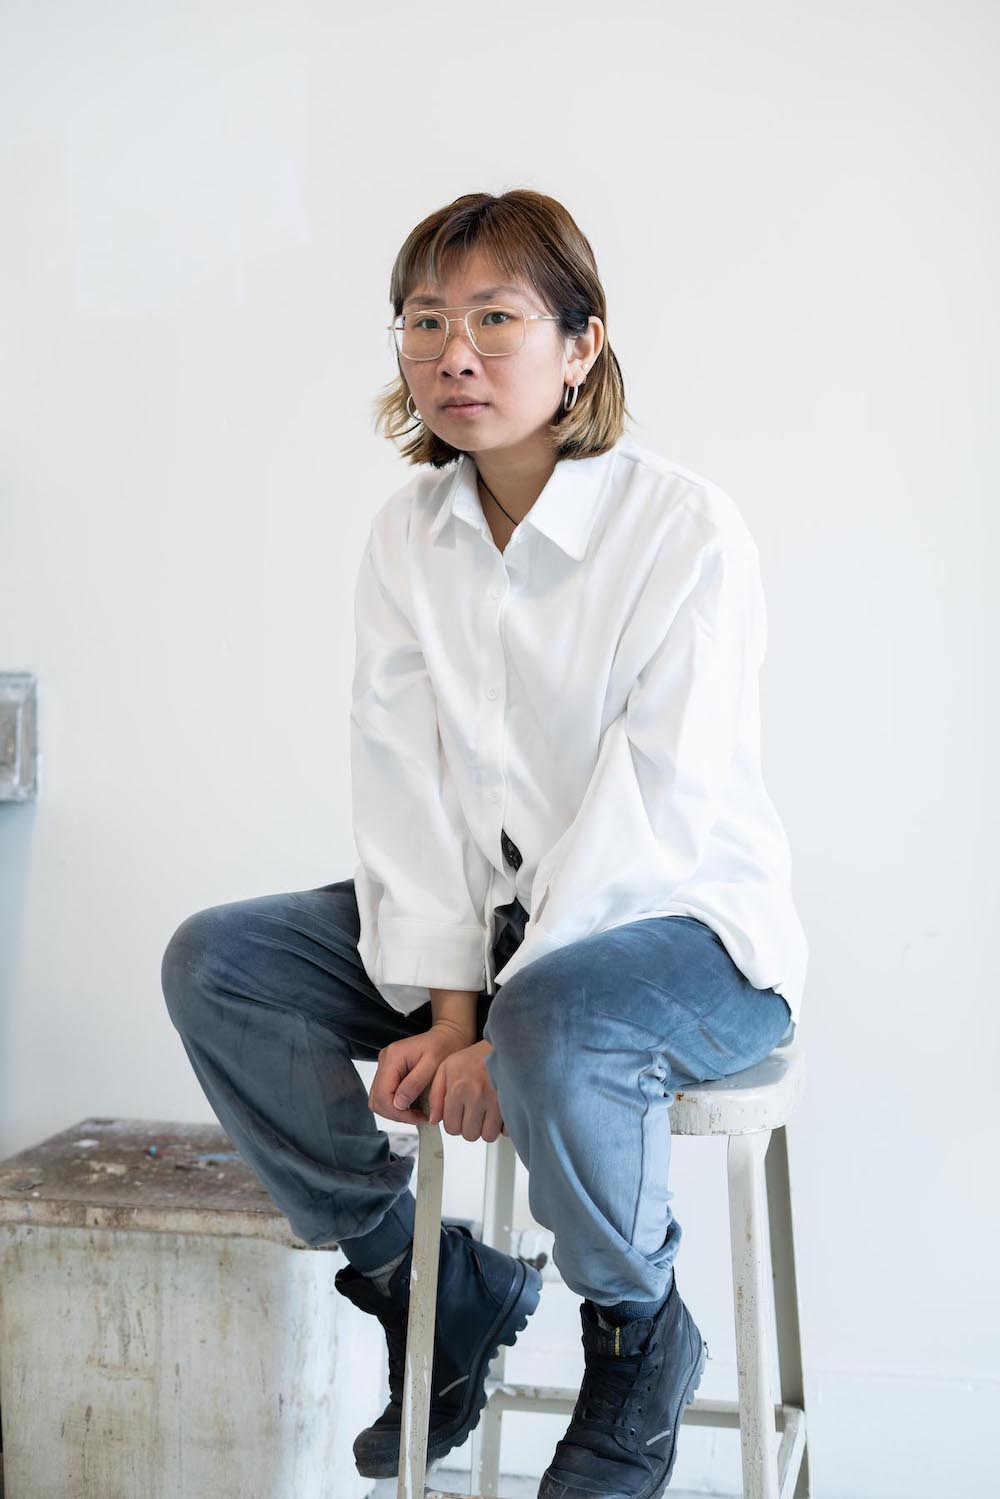 A woman with short brown hair wears a white button-down shirt and jeans and sits on a metal stool